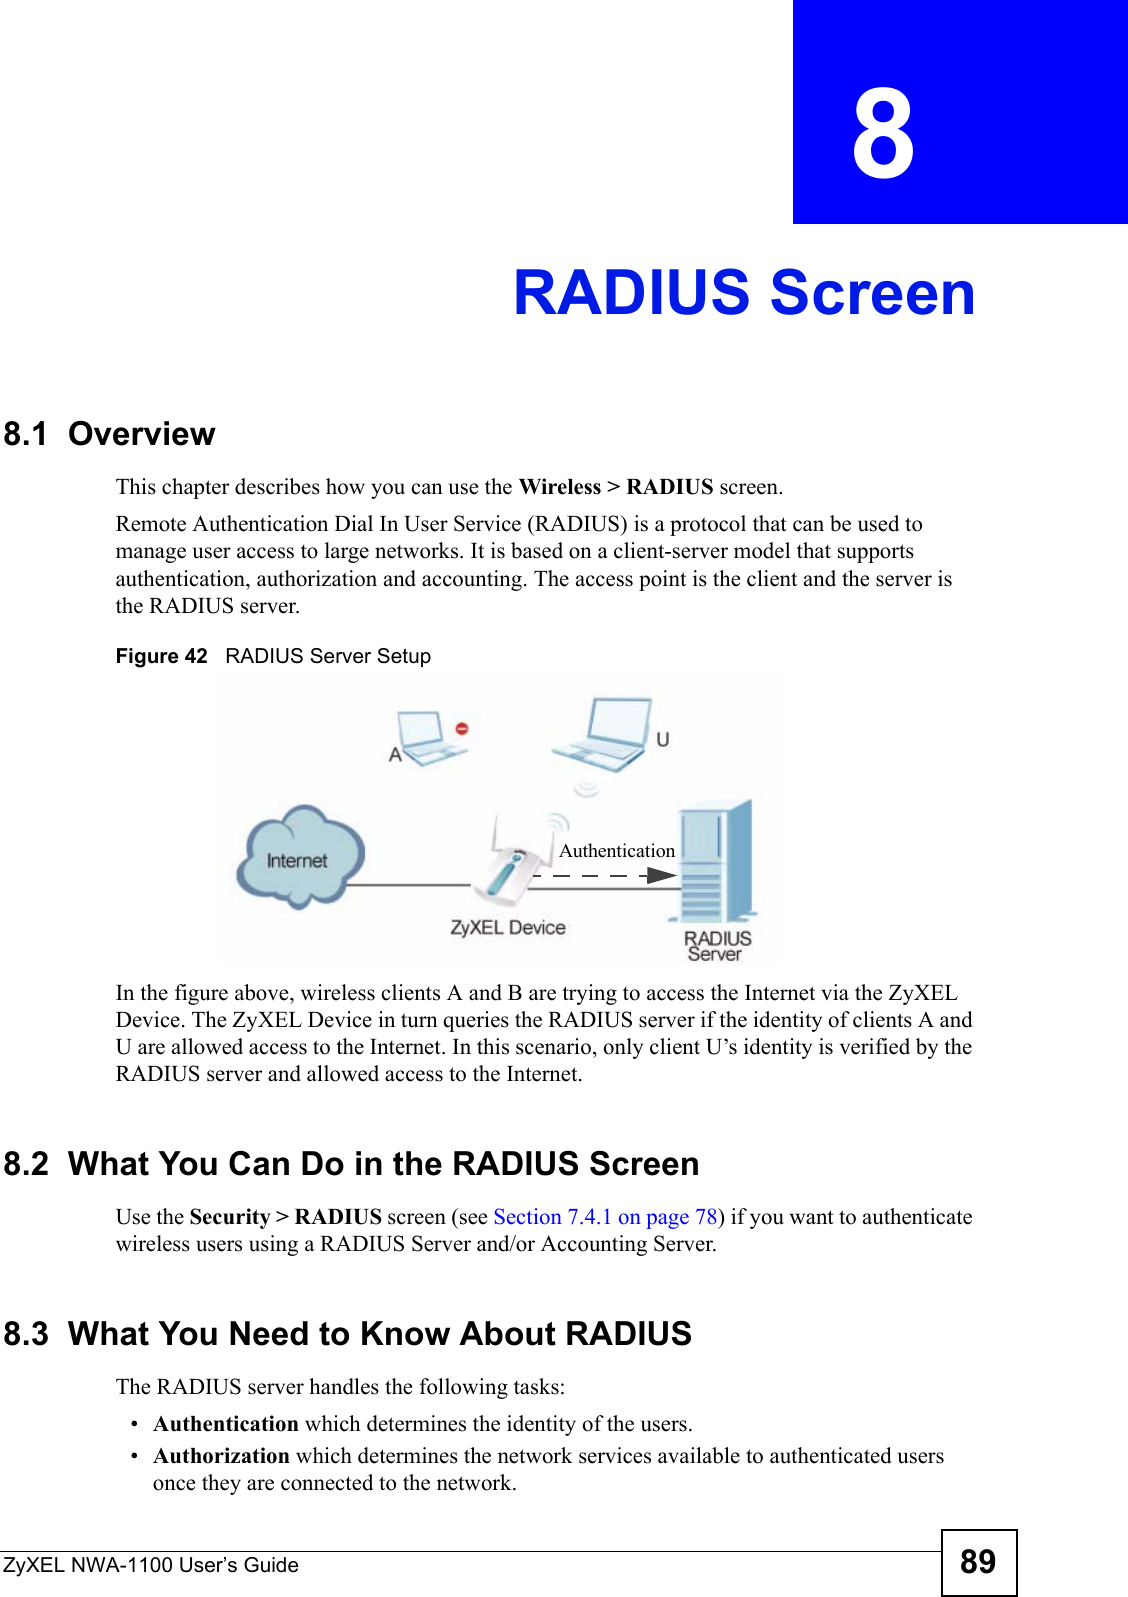 ZyXEL NWA-1100 User’s Guide 89CHAPTER  8 RADIUS Screen8.1  OverviewThis chapter describes how you can use the Wireless &gt; RADIUS screen.Remote Authentication Dial In User Service (RADIUS) is a protocol that can be used to manage user access to large networks. It is based on a client-server model that supports authentication, authorization and accounting. The access point is the client and the server is the RADIUS server. Figure 42   RADIUS Server SetupIn the figure above, wireless clients A and B are trying to access the Internet via the ZyXEL Device. The ZyXEL Device in turn queries the RADIUS server if the identity of clients A and U are allowed access to the Internet. In this scenario, only client U’s identity is verified by the RADIUS server and allowed access to the Internet.  8.2  What You Can Do in the RADIUS ScreenUse the Security &gt; RADIUS screen (see Section 7.4.1 on page 78) if you want to authenticate wireless users using a RADIUS Server and/or Accounting Server.8.3  What You Need to Know About RADIUSThe RADIUS server handles the following tasks:•Authentication which determines the identity of the users.•Authorization which determines the network services available to authenticated users once they are connected to the network.Authentication